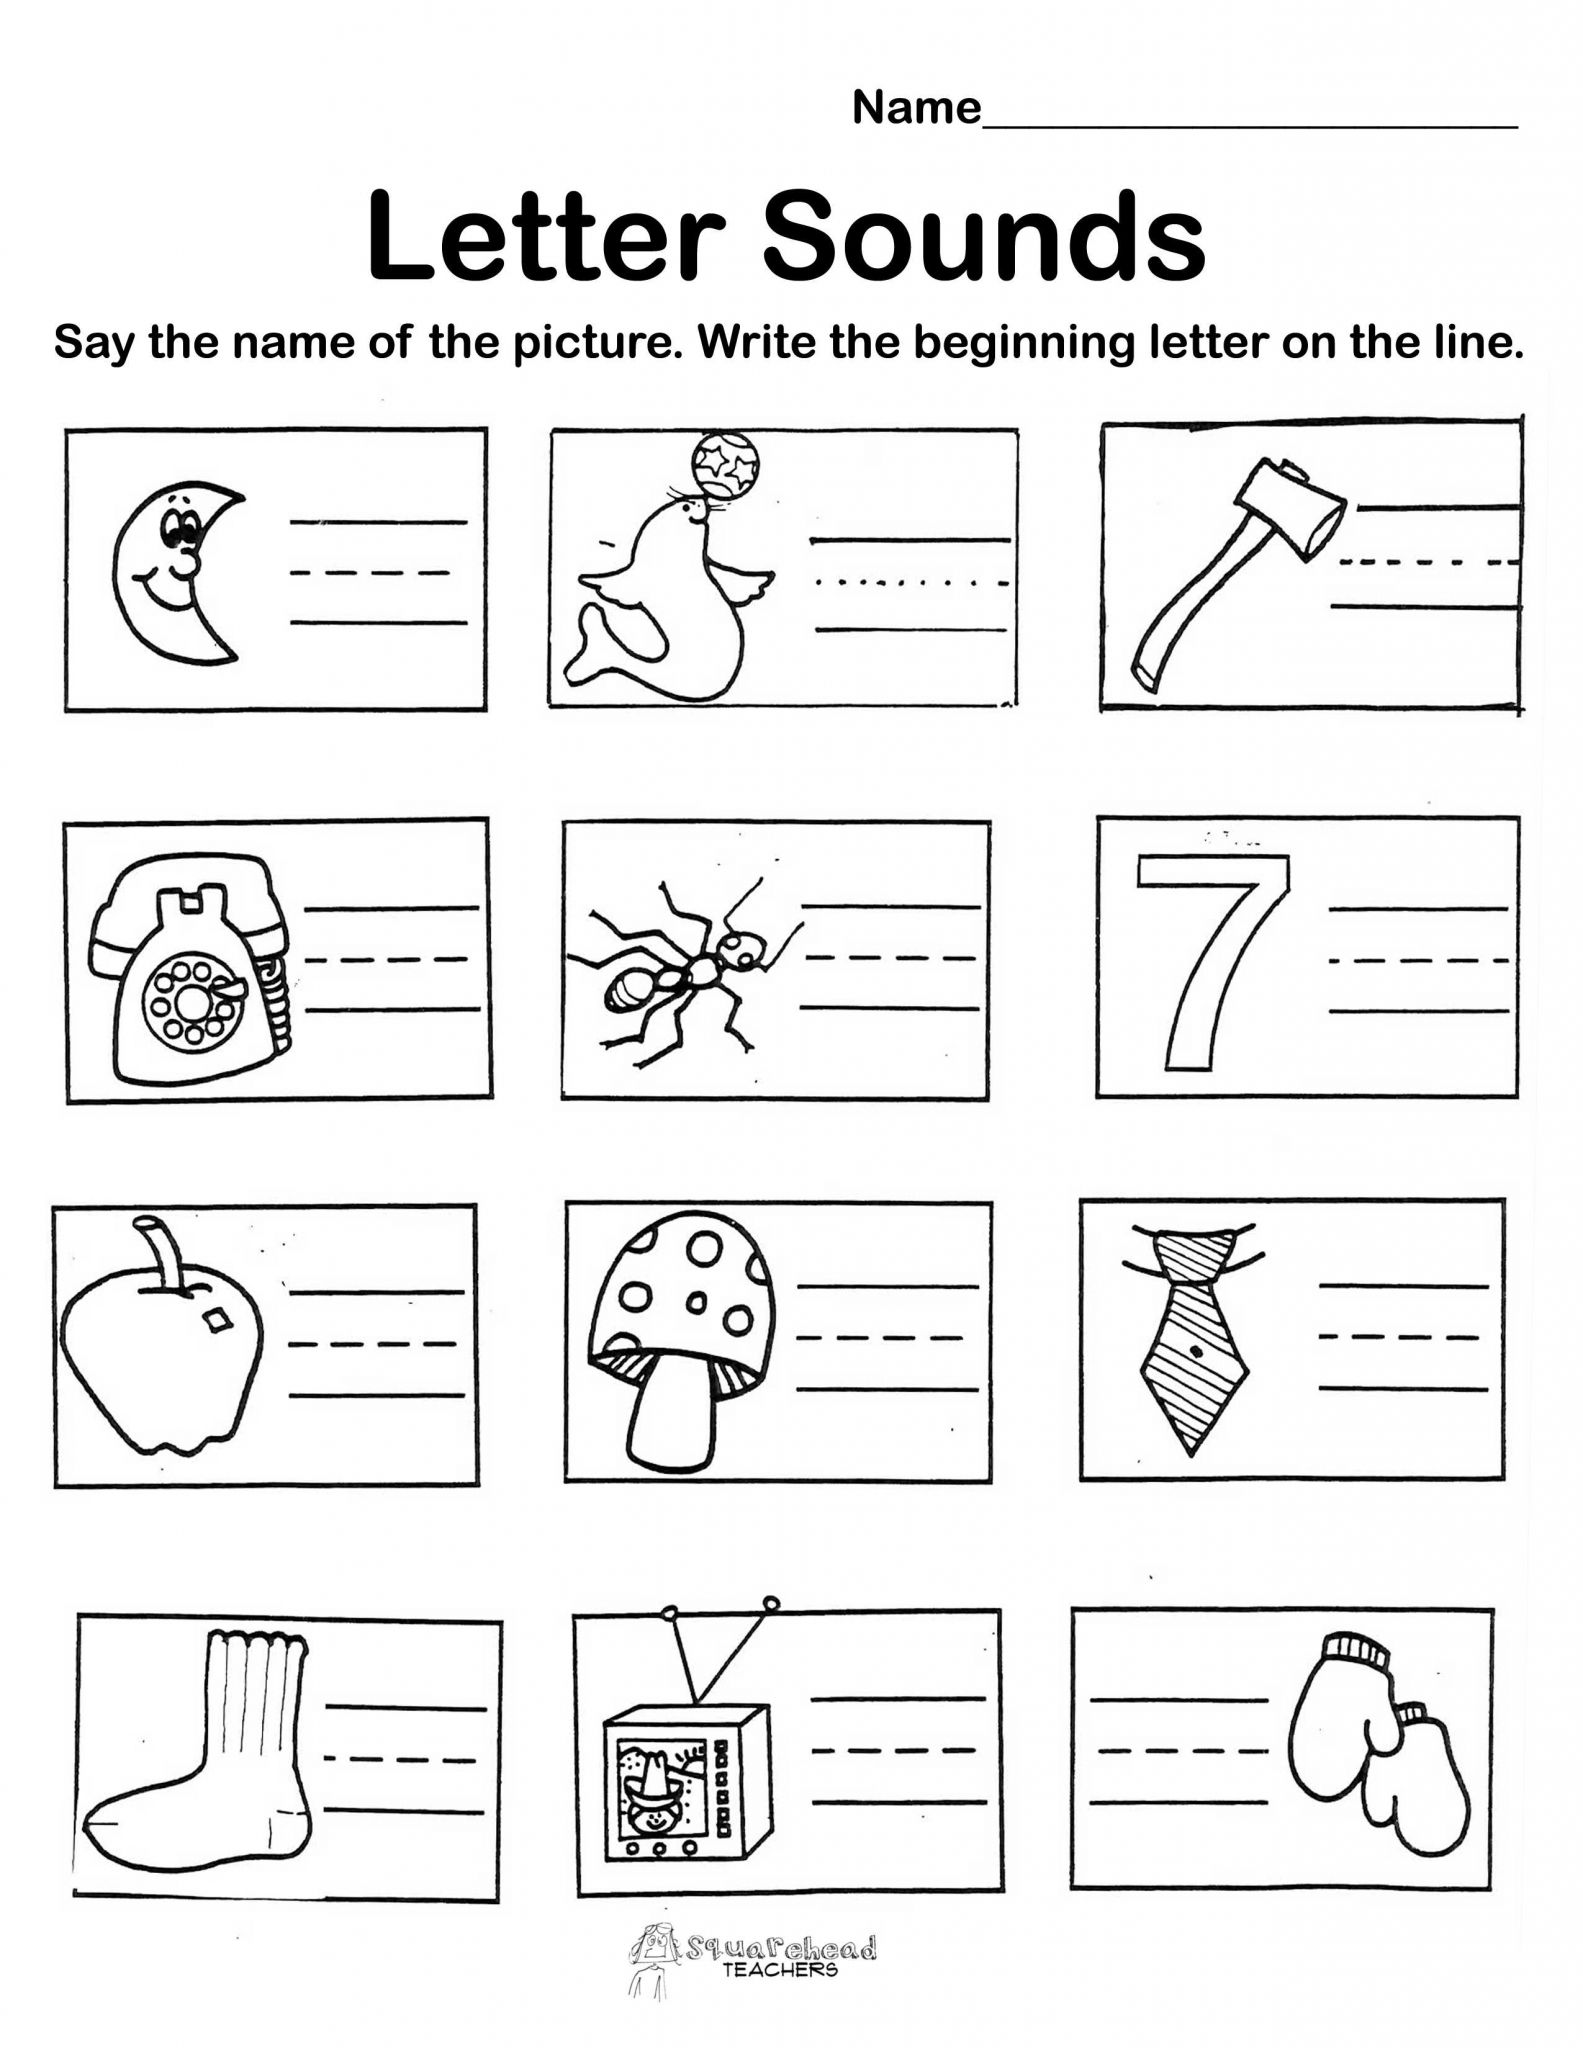 Alphabet Tracing Worksheets for 3 Year Olds Also I Saw This Kind Of Worksheet In A Kindergarten Classroom Recently